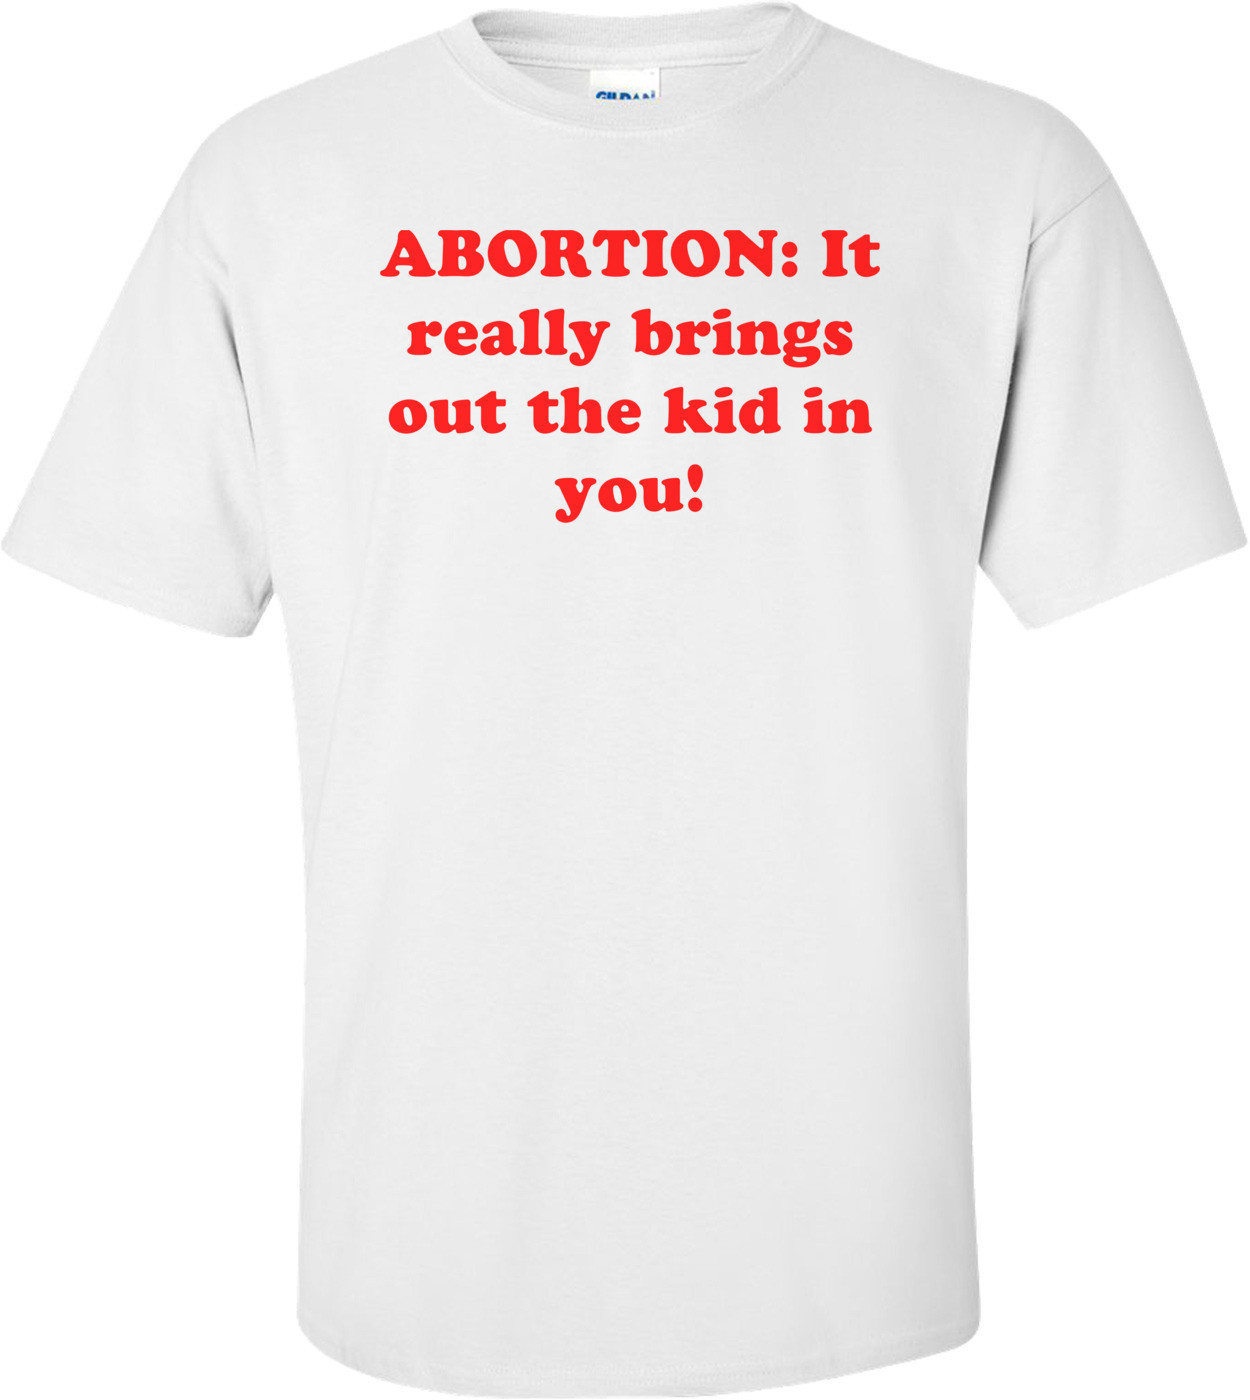 ABORTION: It really brings out the kid in you! Shirt